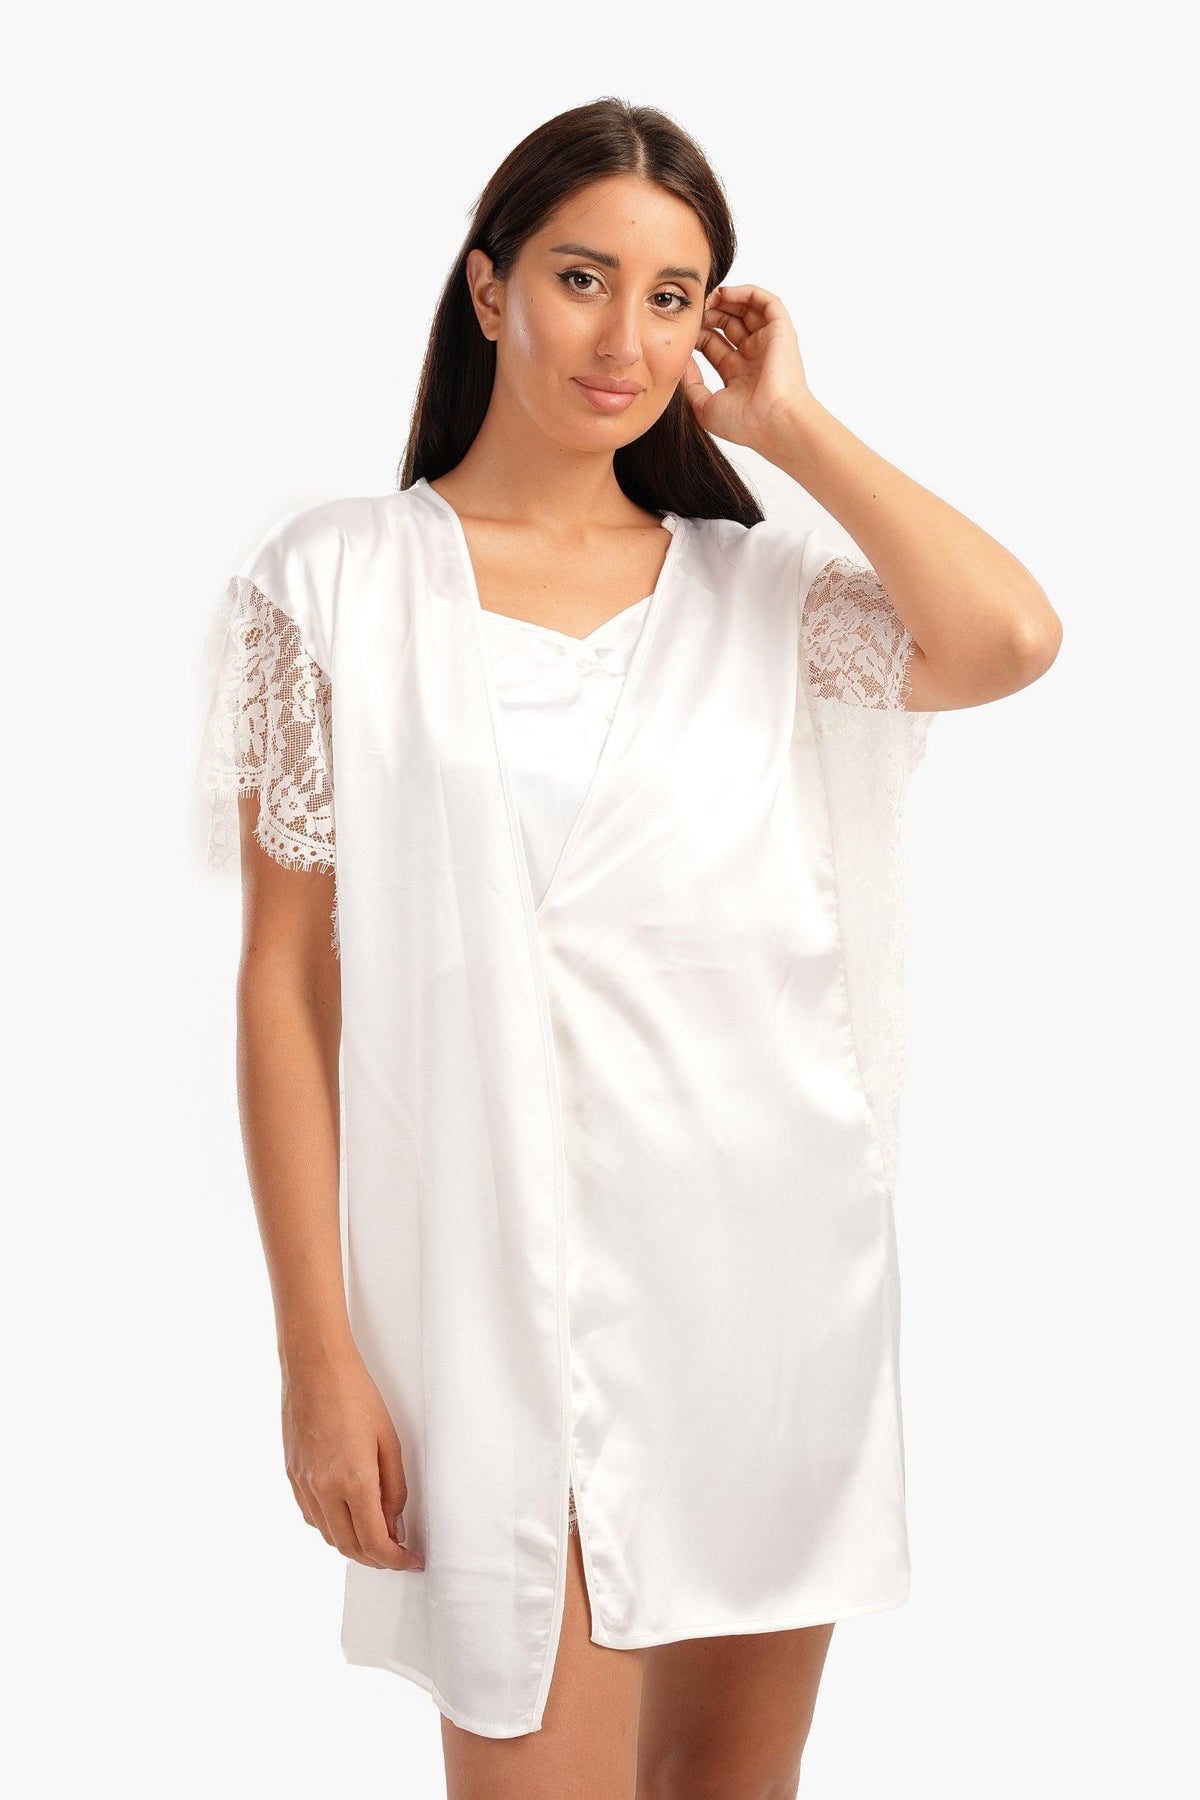 Robe with Lace Short Sleeves - Carina - كارينا